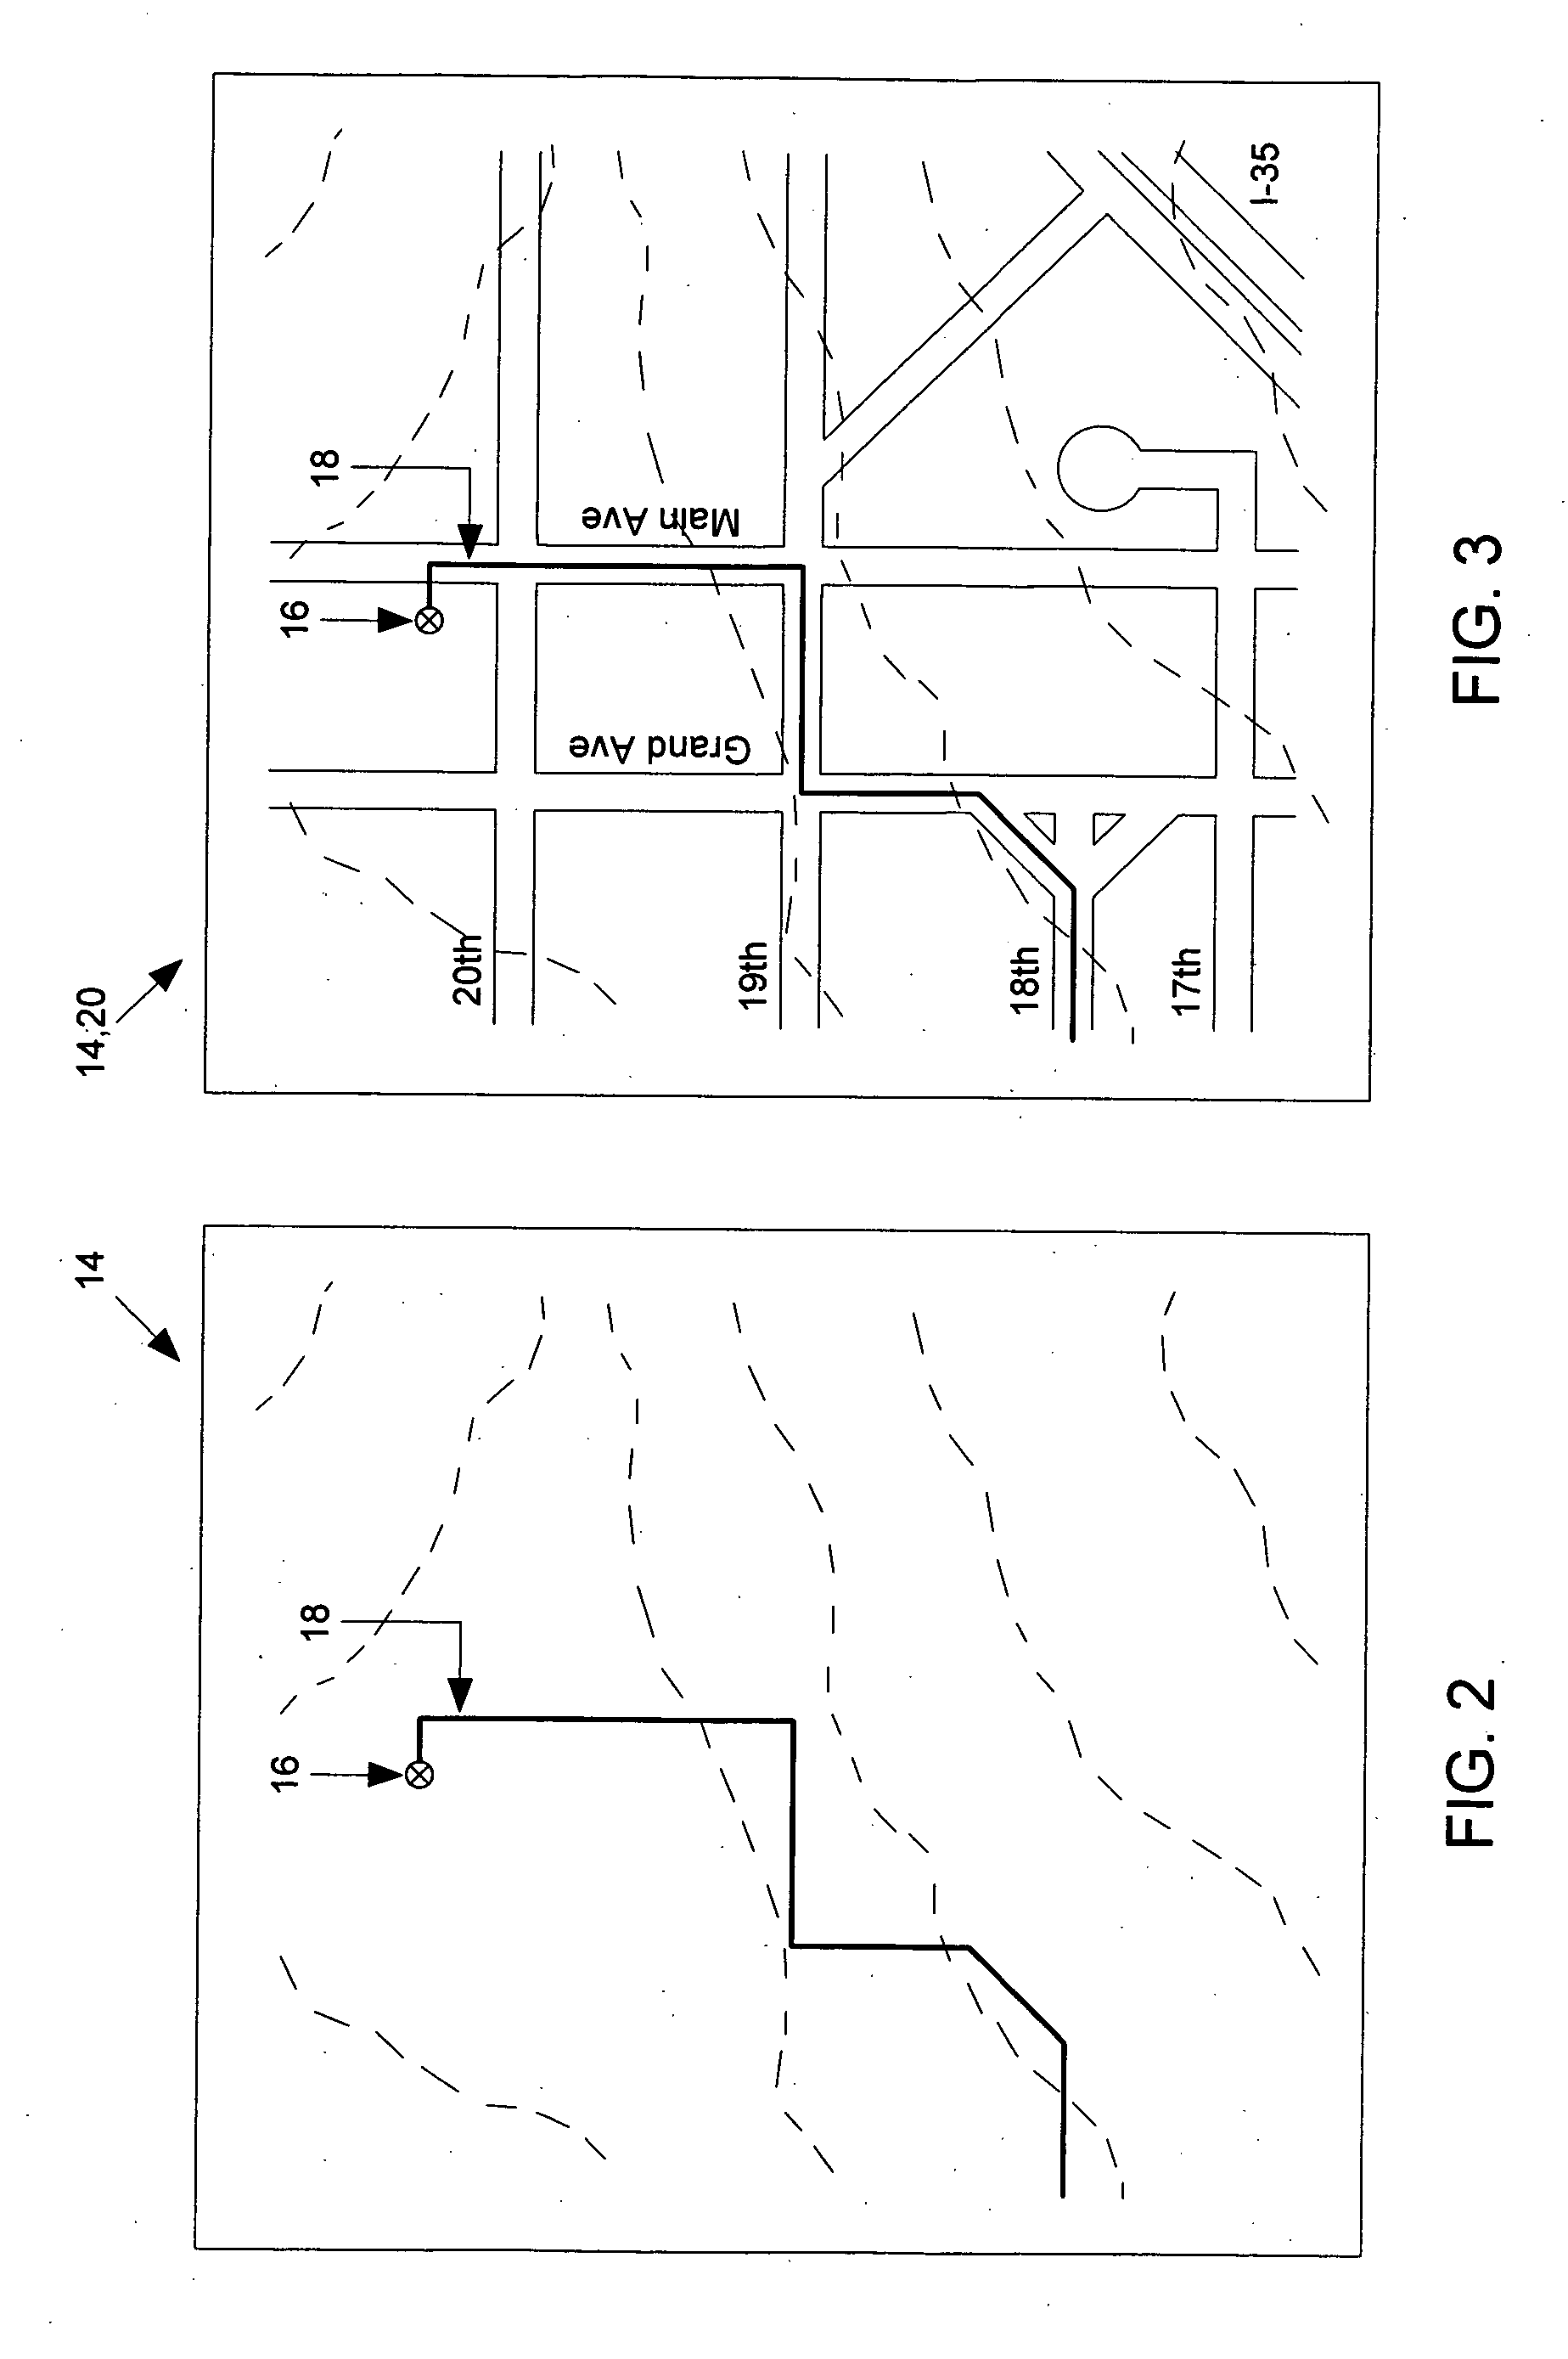 GPS device and method for layered display of elements